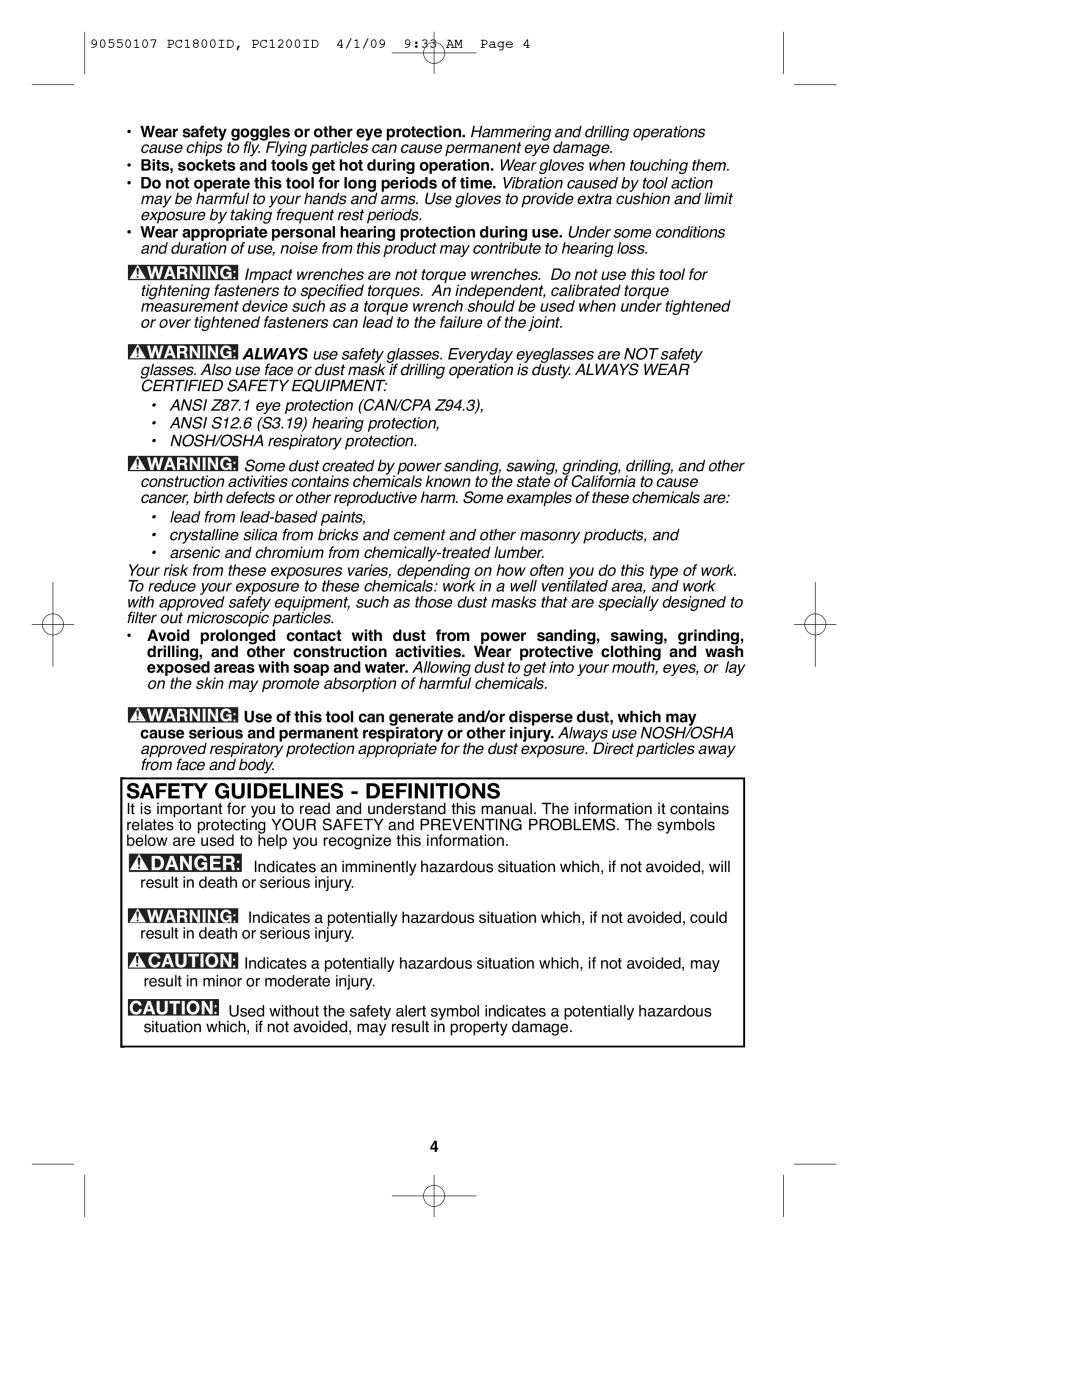 Porter-Cable PCL180ID, PC1800ID, 90550107, PC1200ID instruction manual Safety Guidelines - Definitions 